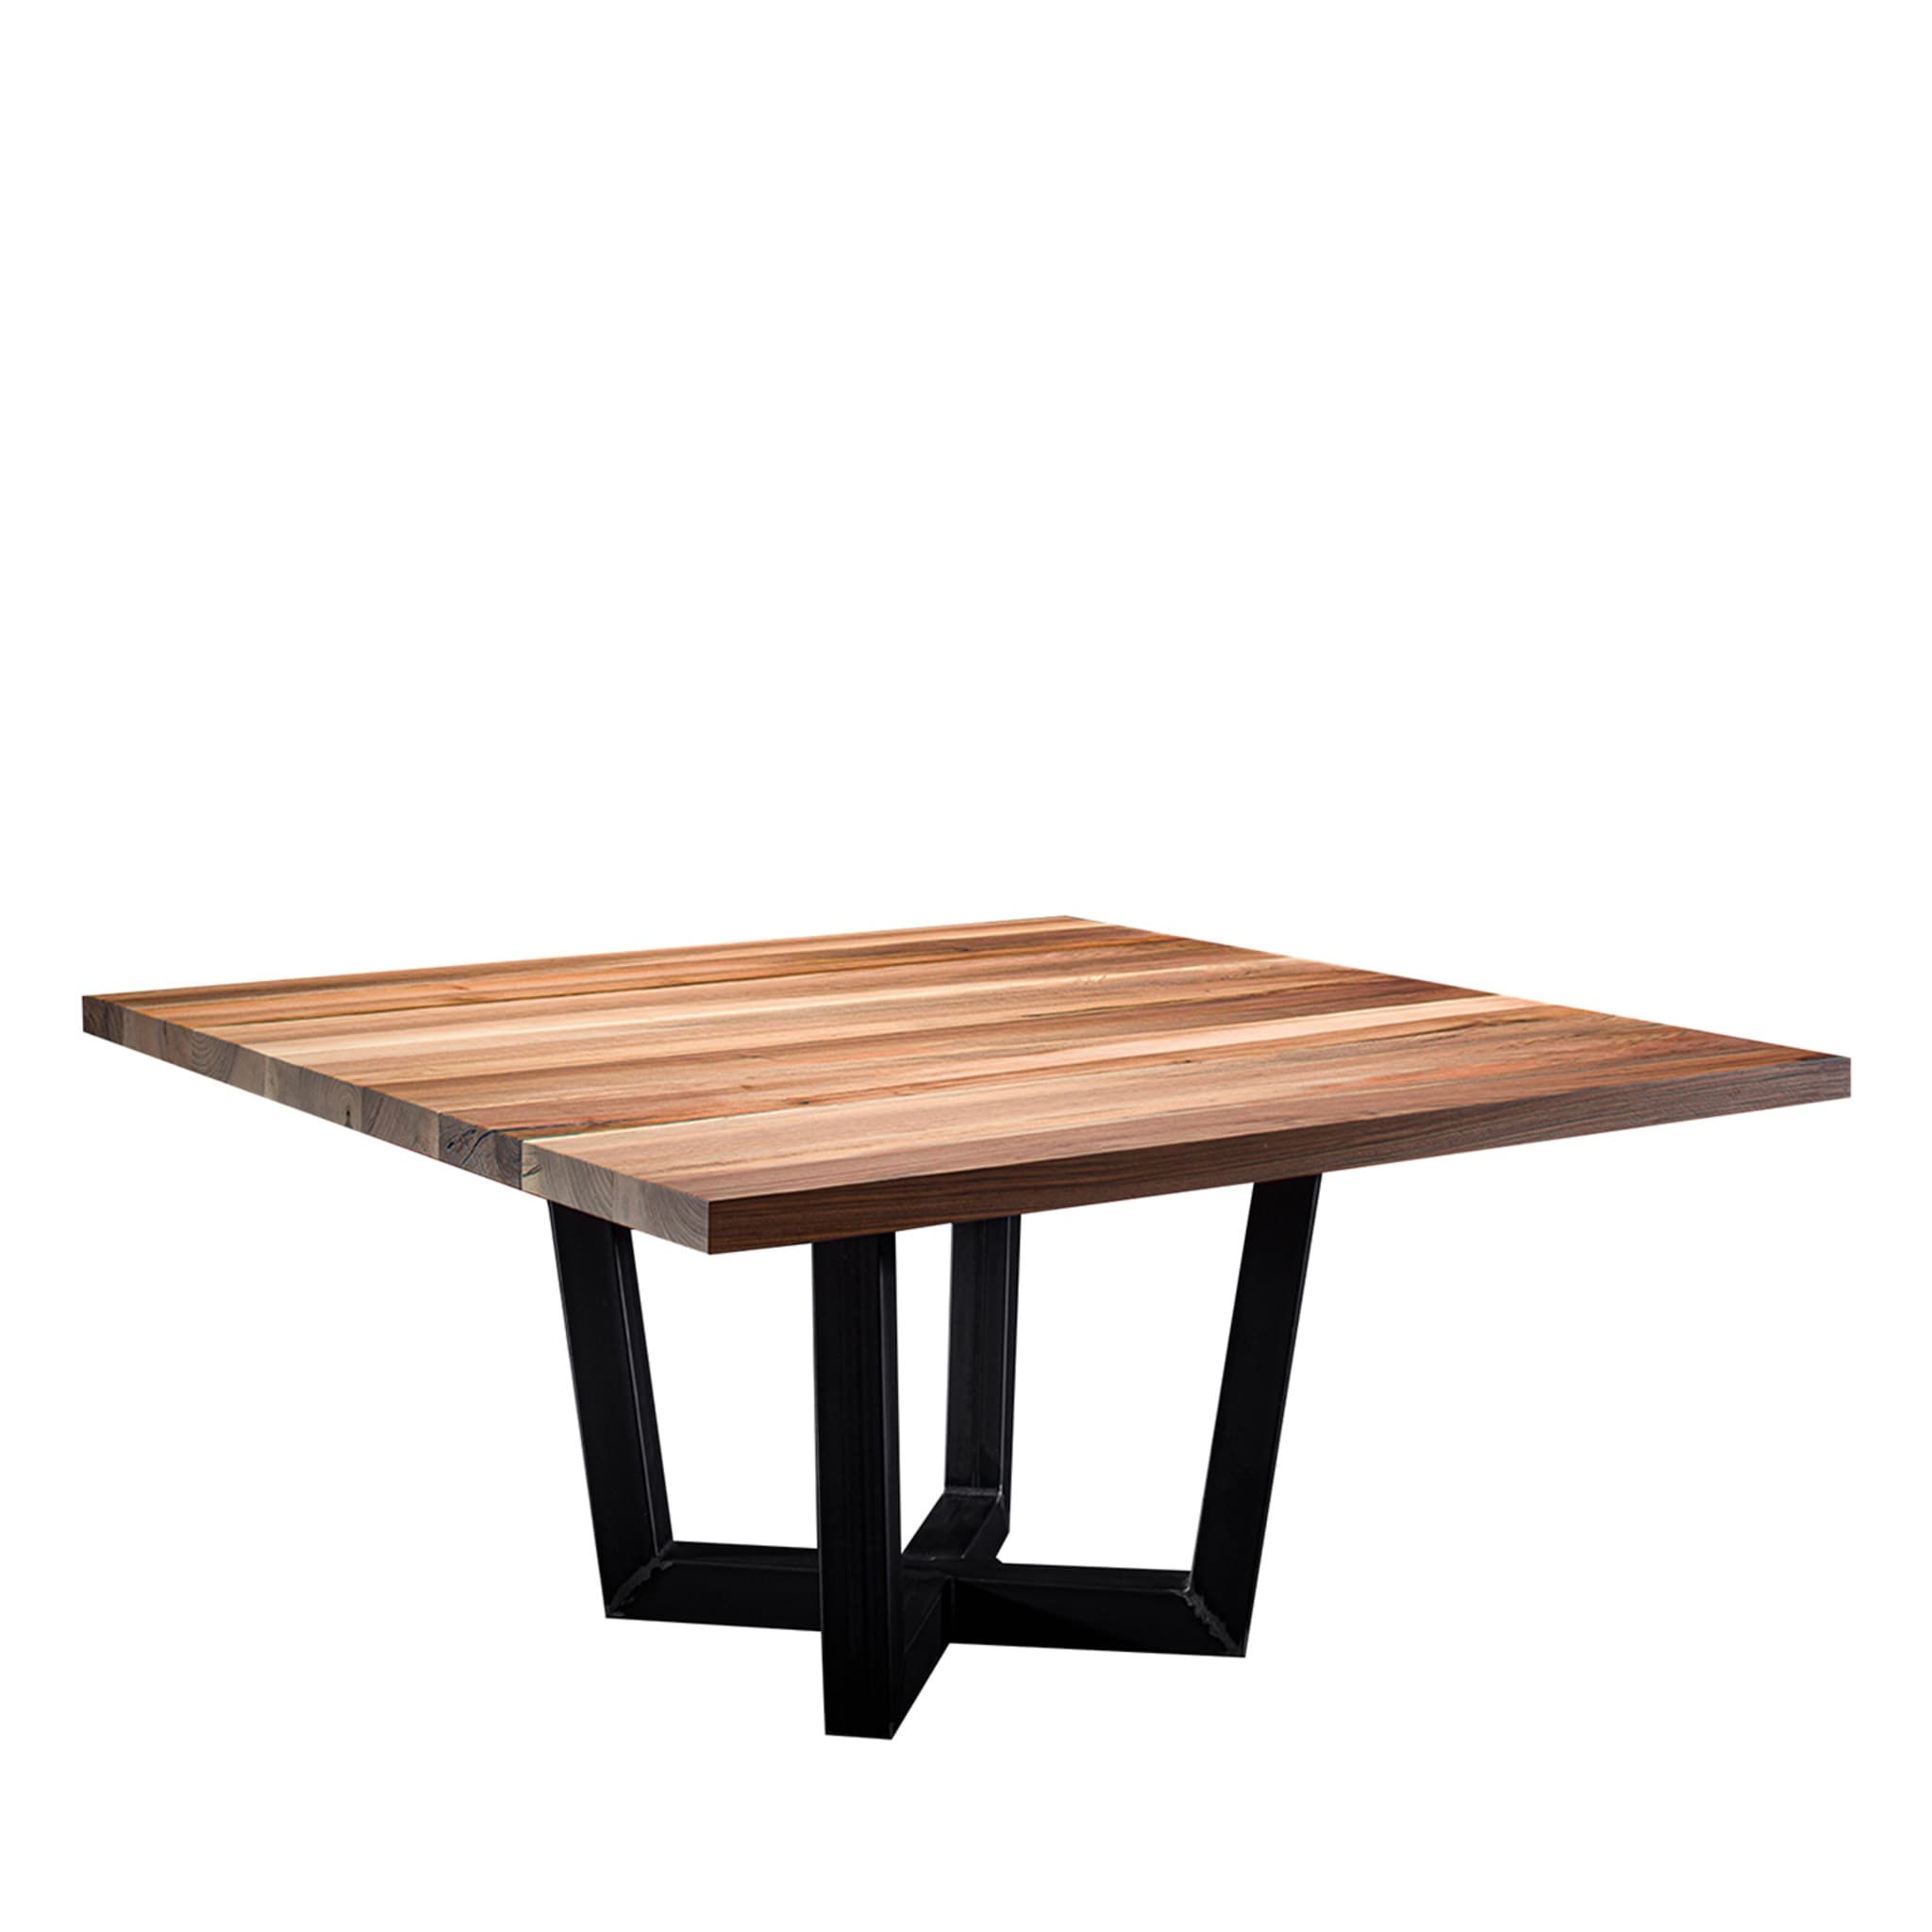 Square walnut dining table - Main view